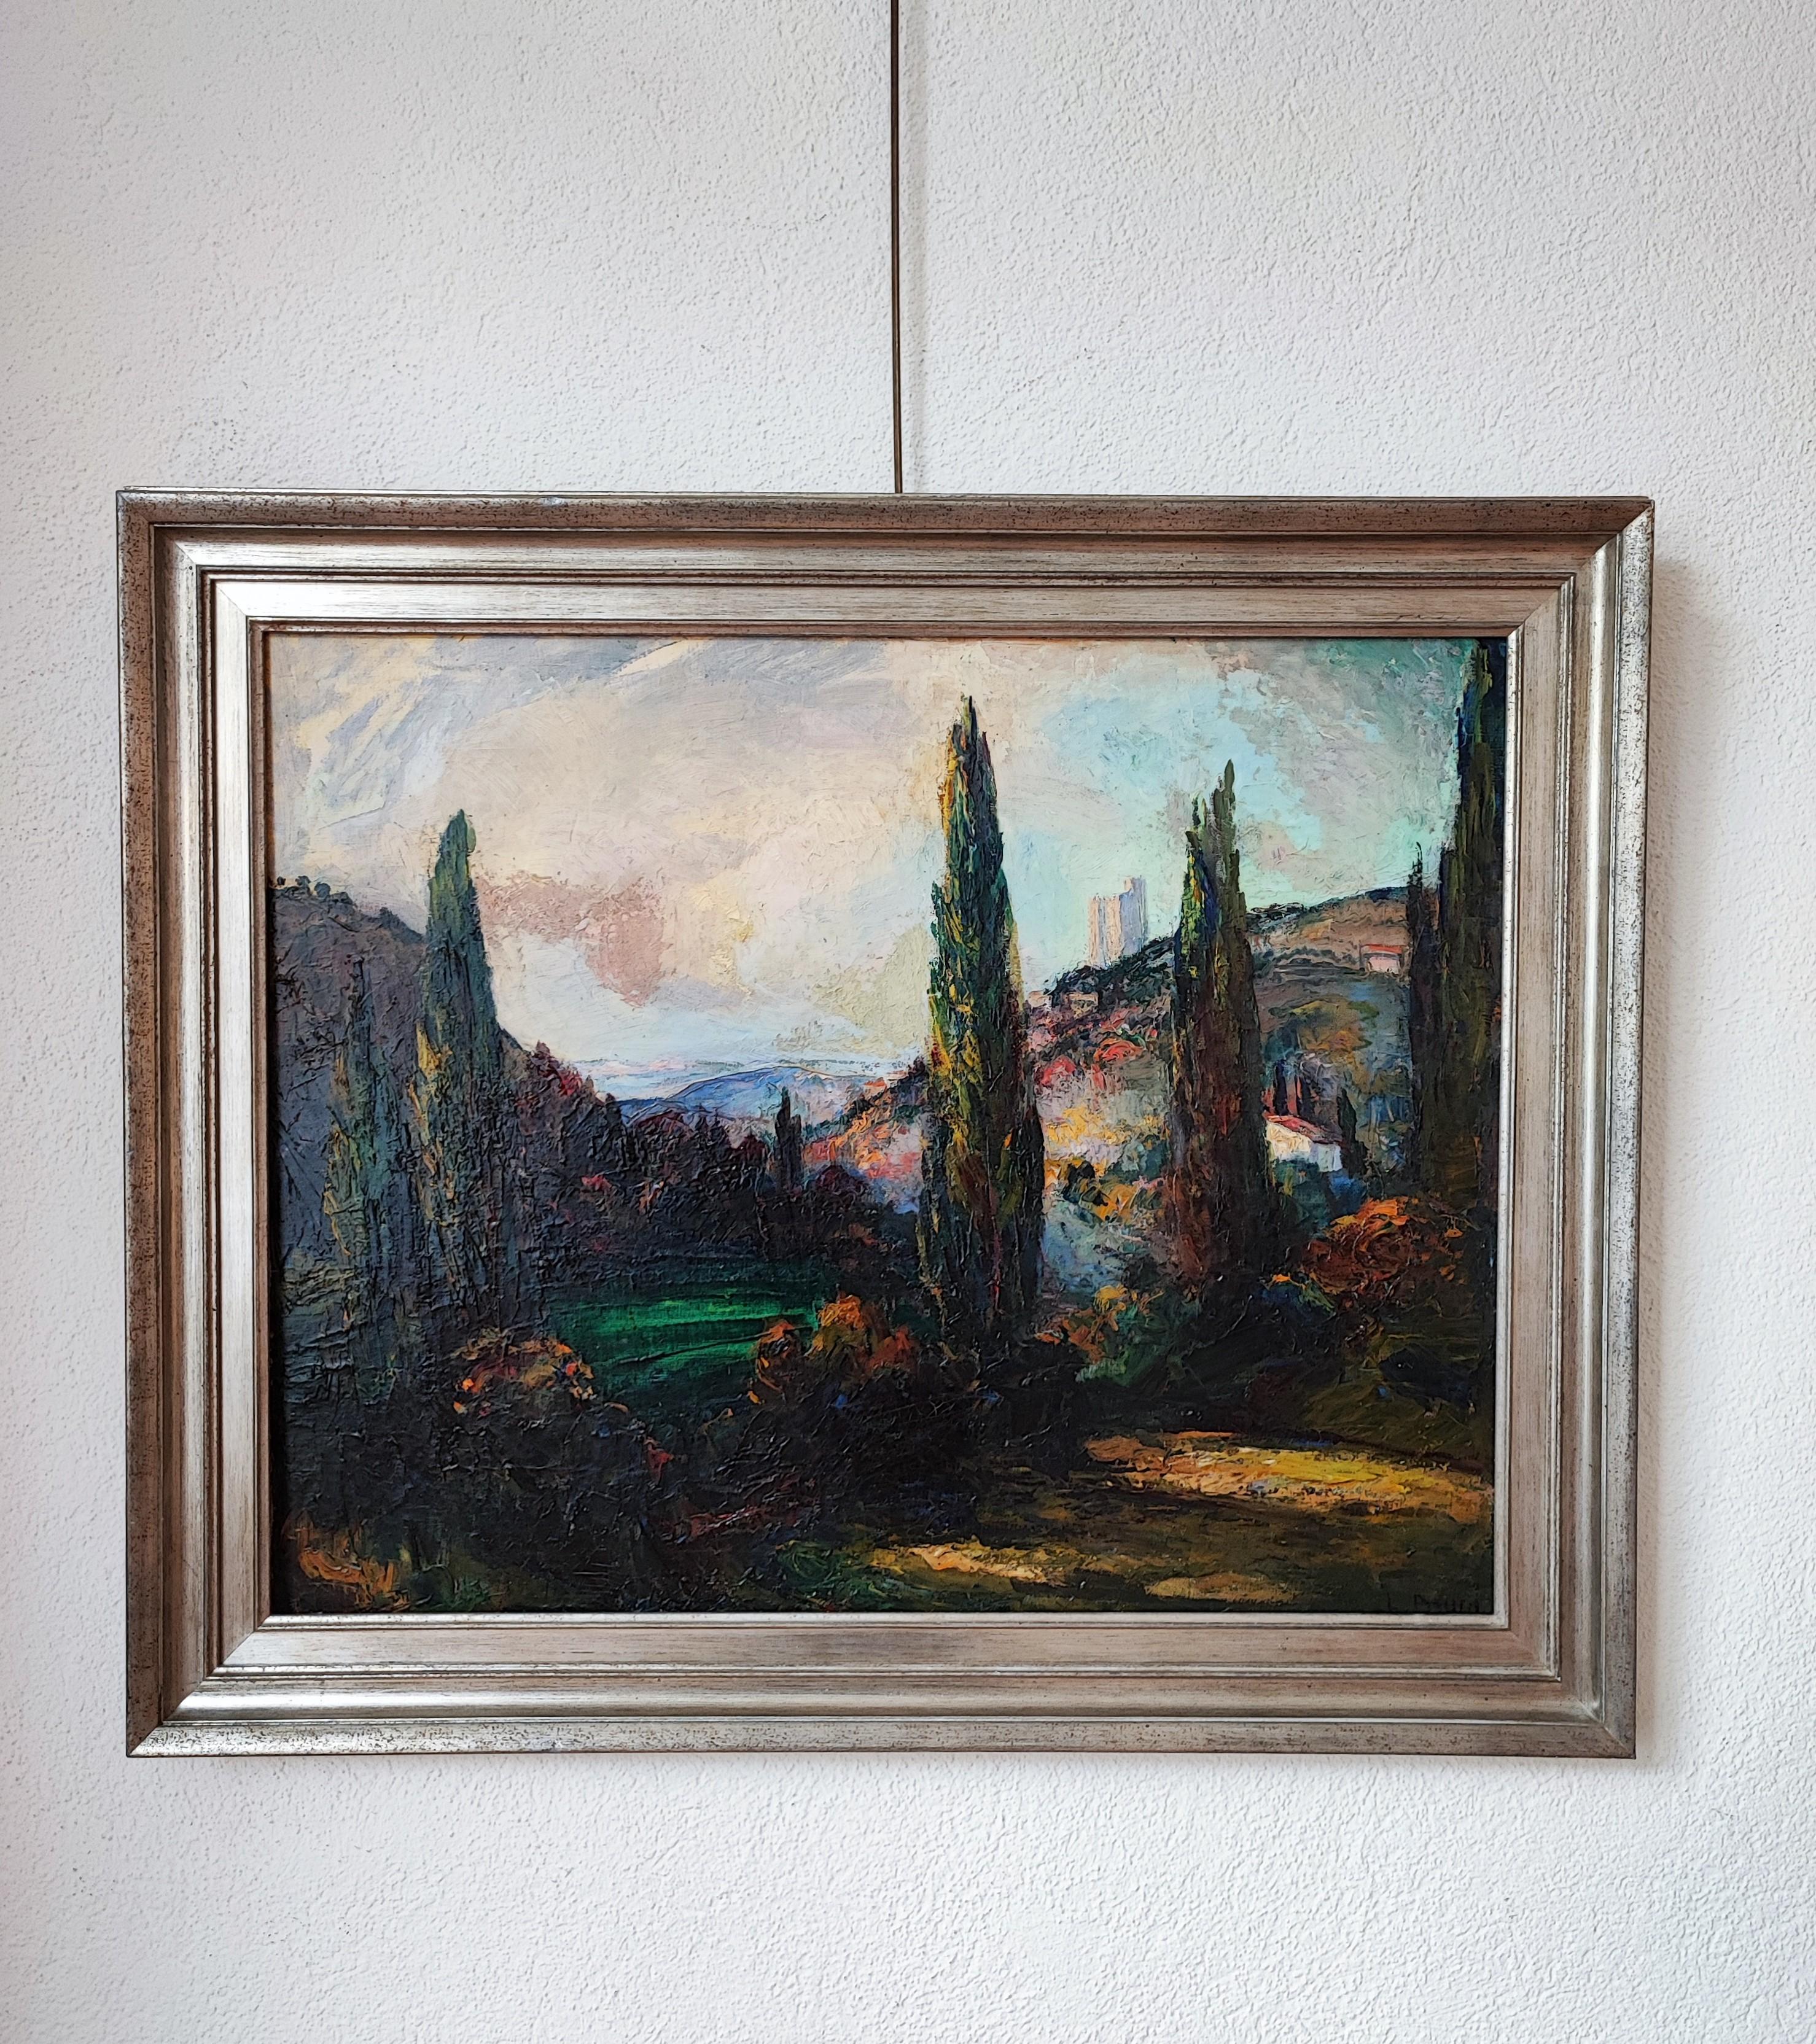 Landscape with cypresses - Painting by Laure Stella Bruni